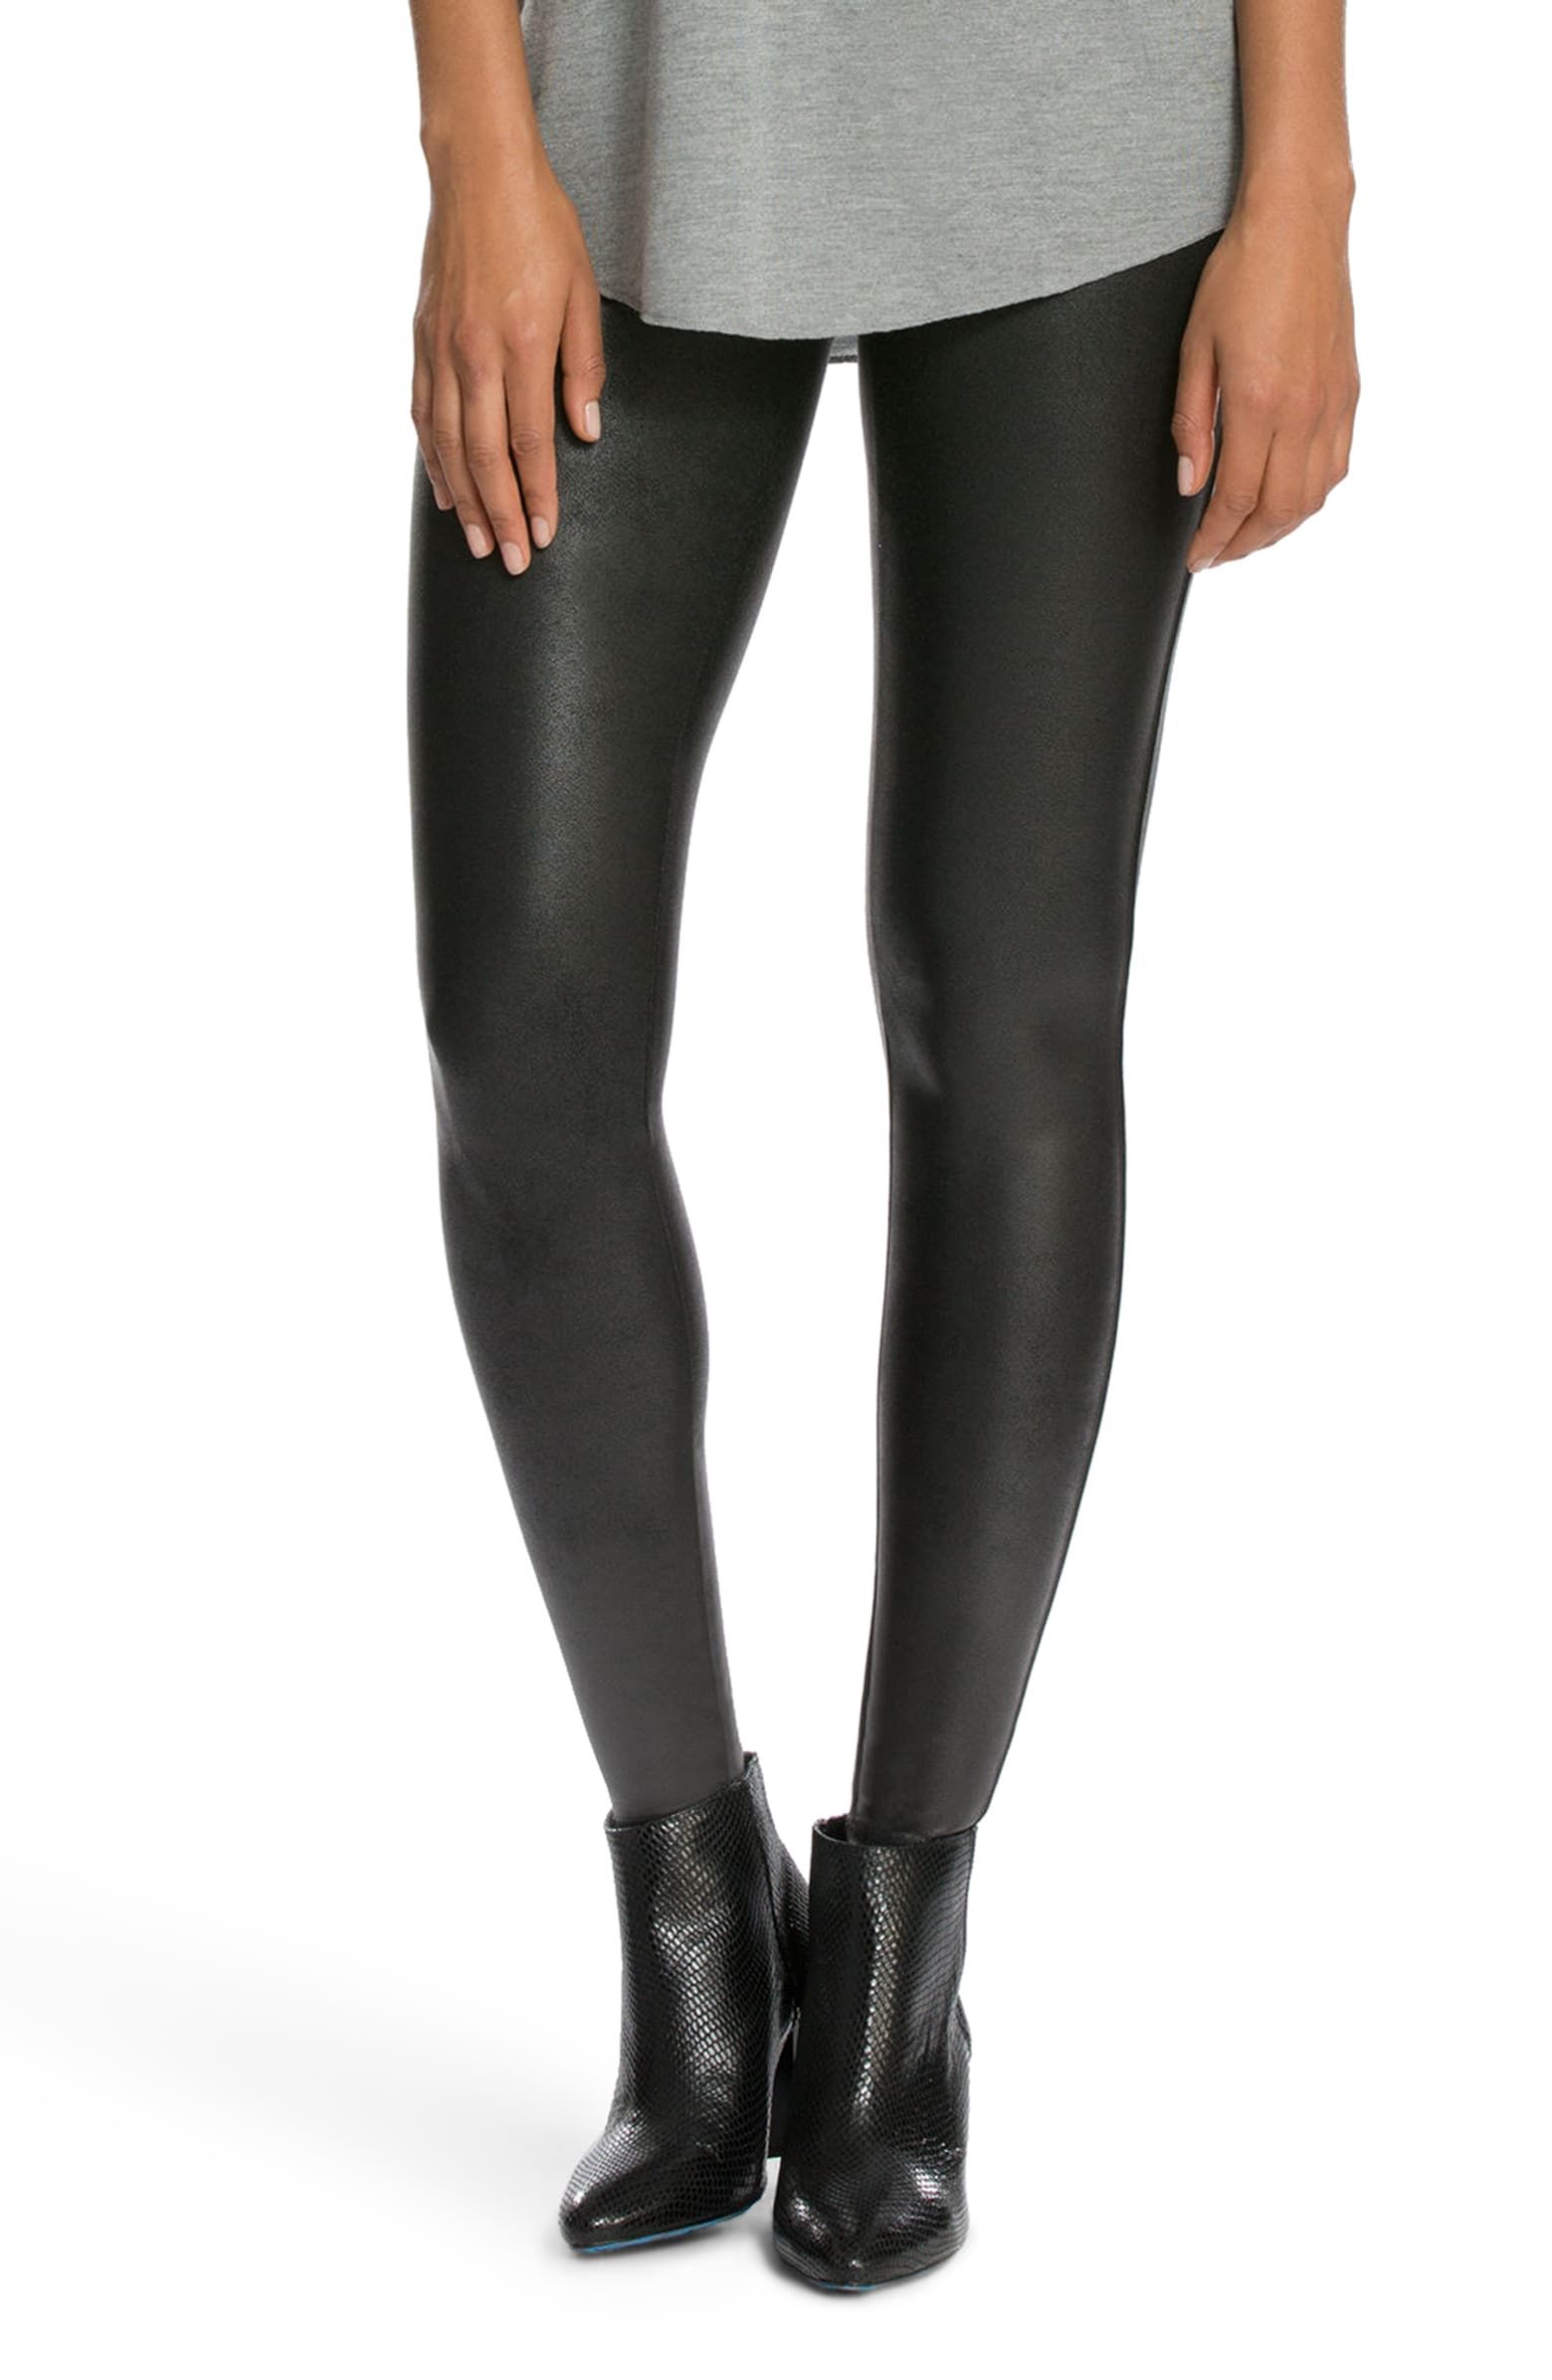 We Found the Best Faux Leather Leggings - MomTrends